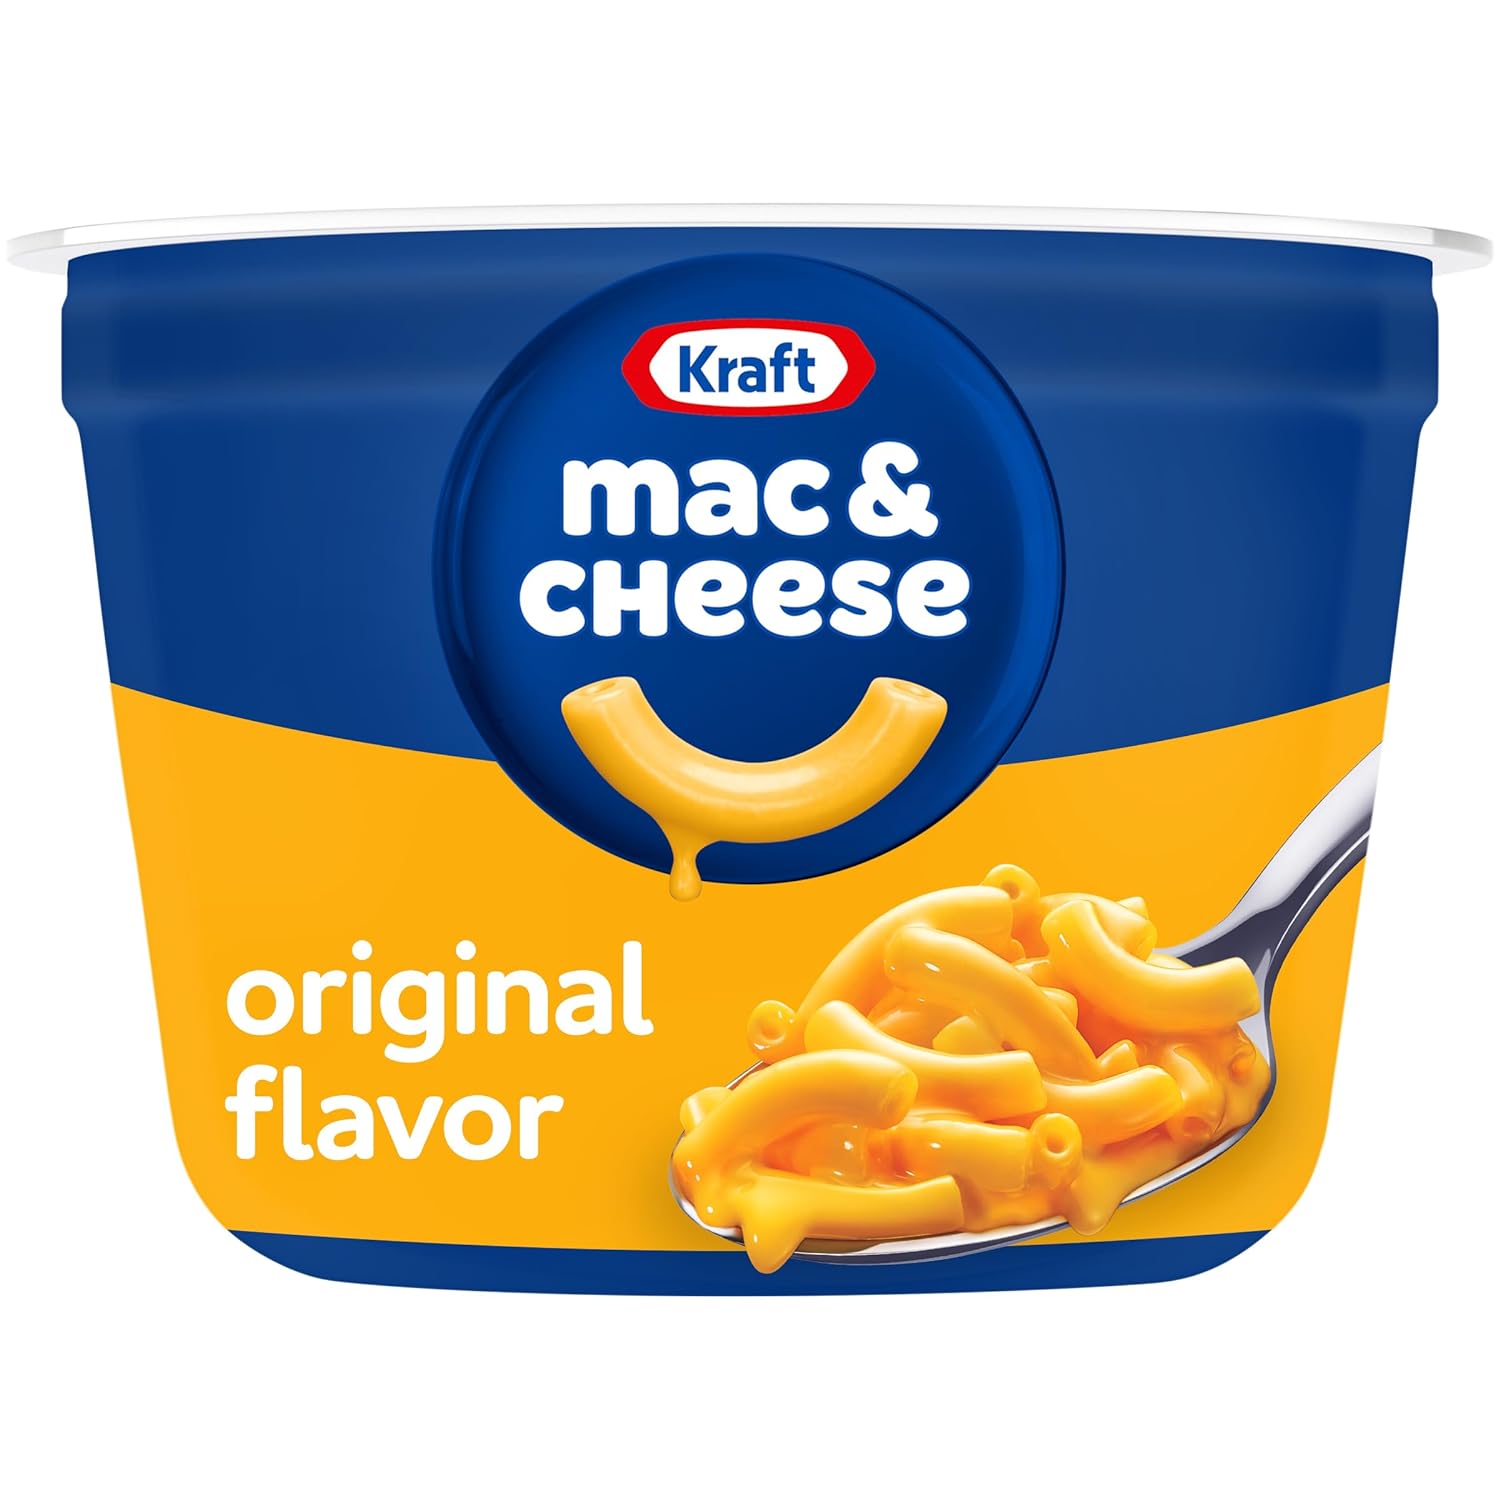 Kraft Original Macaroni and Cheese Cups Easy Microwavable Dinner (2.05 oz Cup)